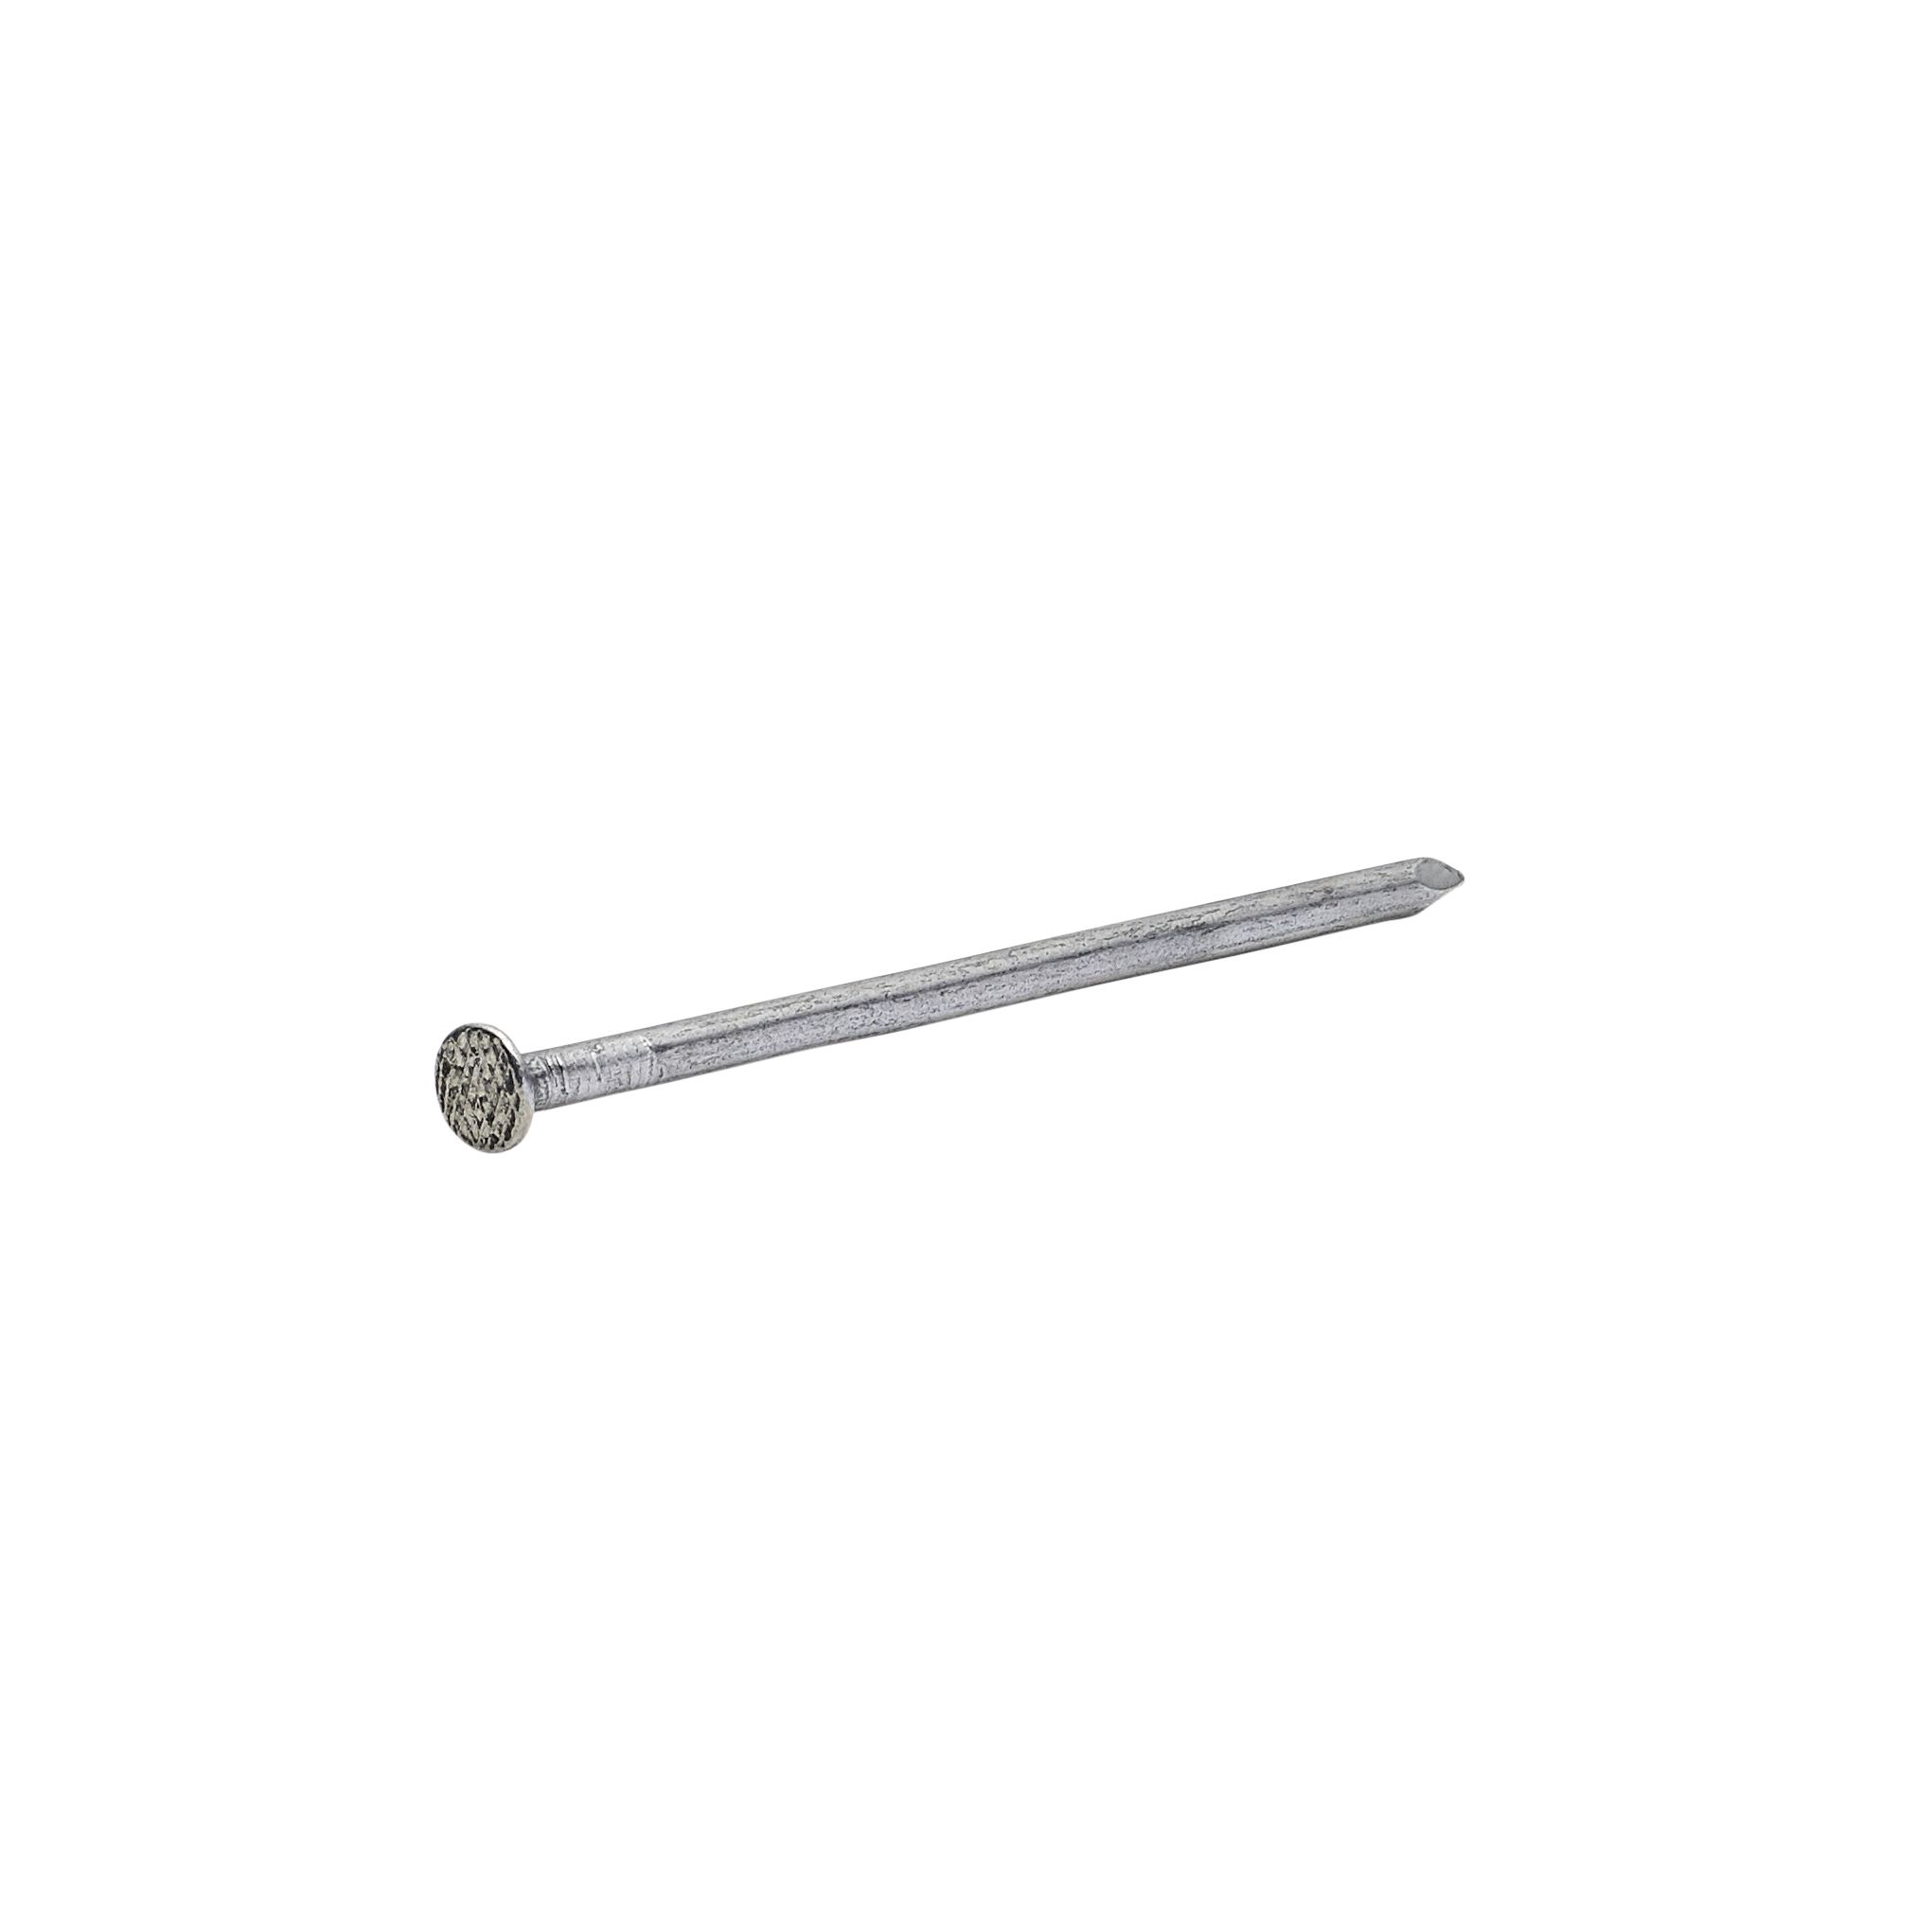 Diall Round wire nail (L)100mm (Dia)4.5mm 125g